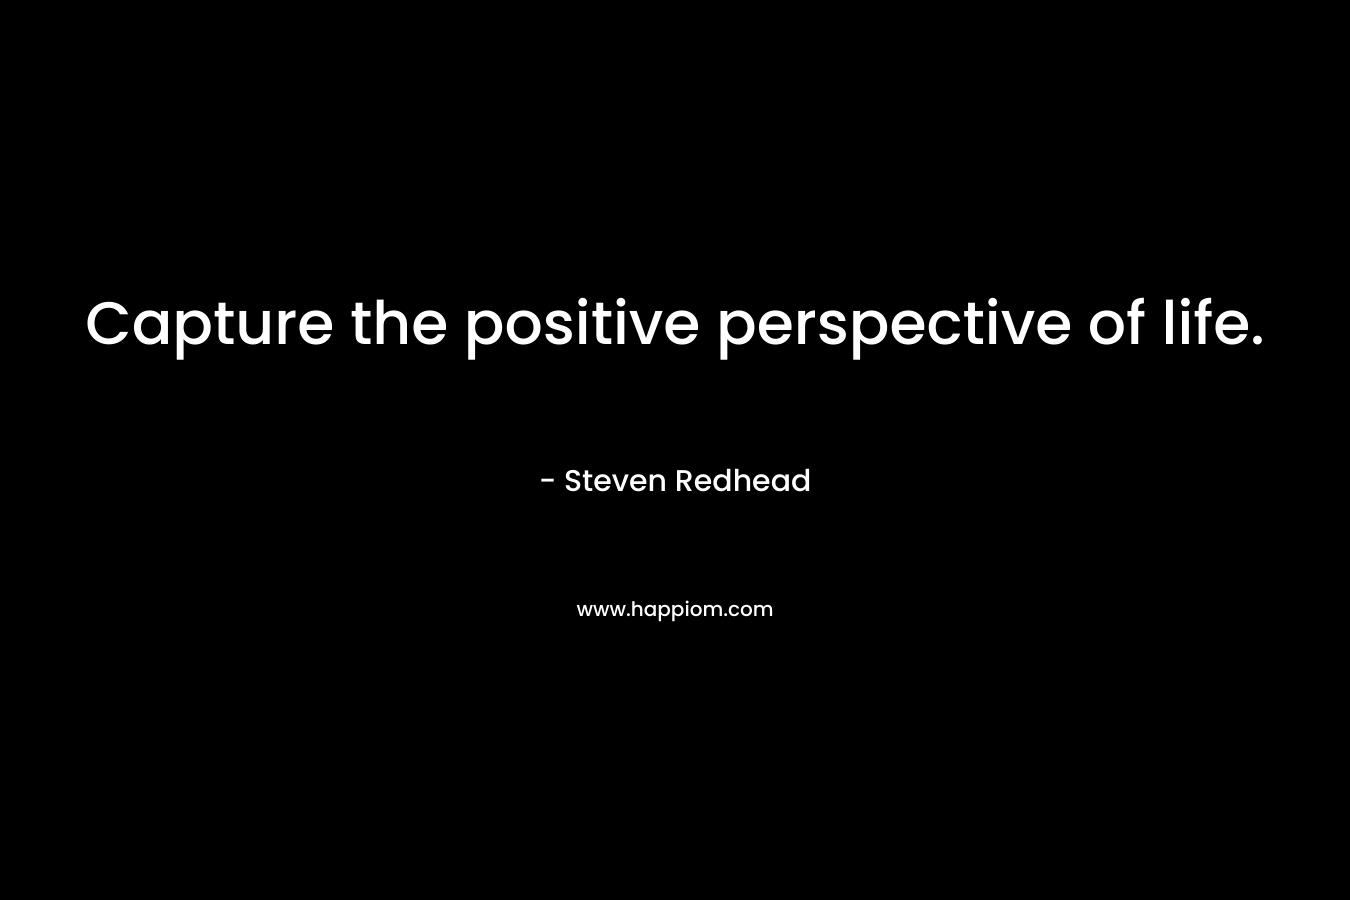 Capture the positive perspective of life.